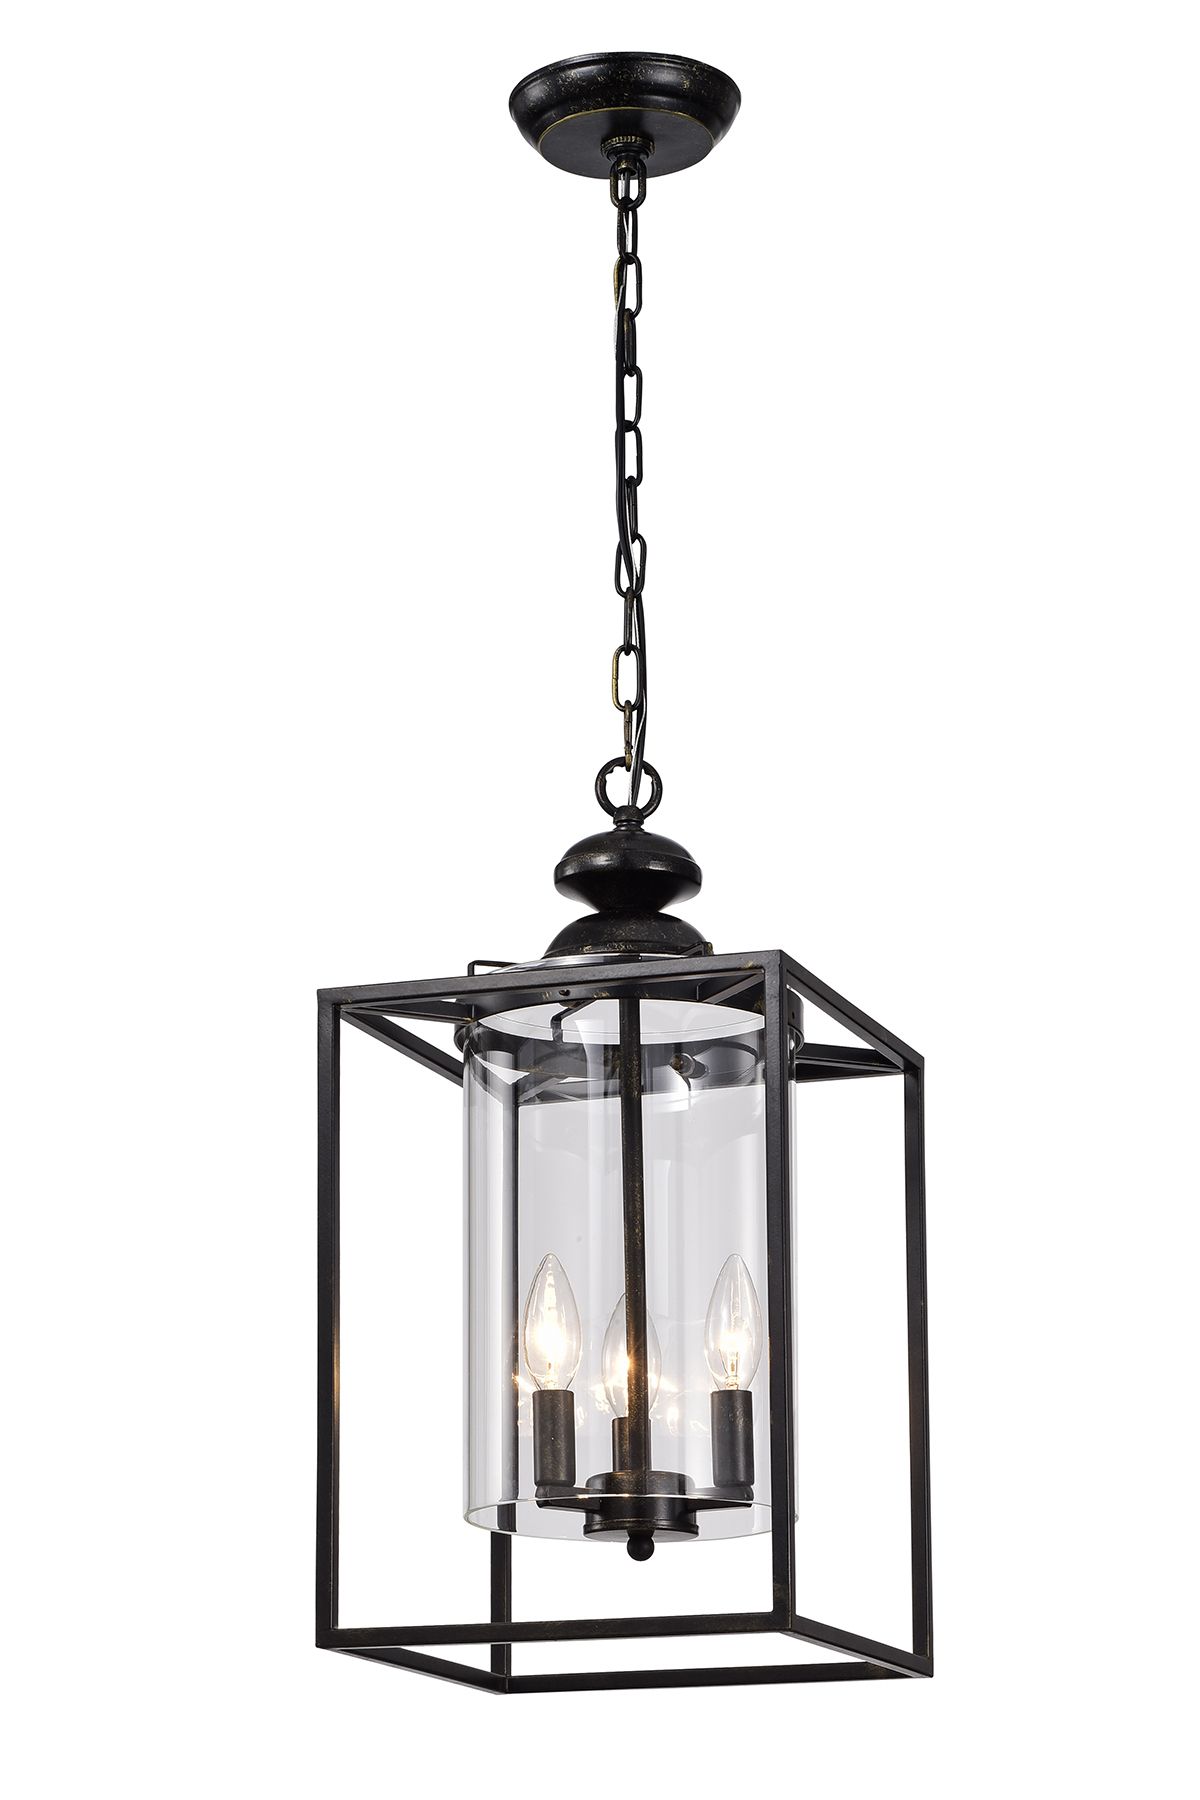 3 Light Antique Bronze Metal Lantern Chandelier With A Hurricane Glass Shade  – Edvivi Lighting With Regard To Clear Glass Shade Lantern Chandeliers (View 7 of 15)